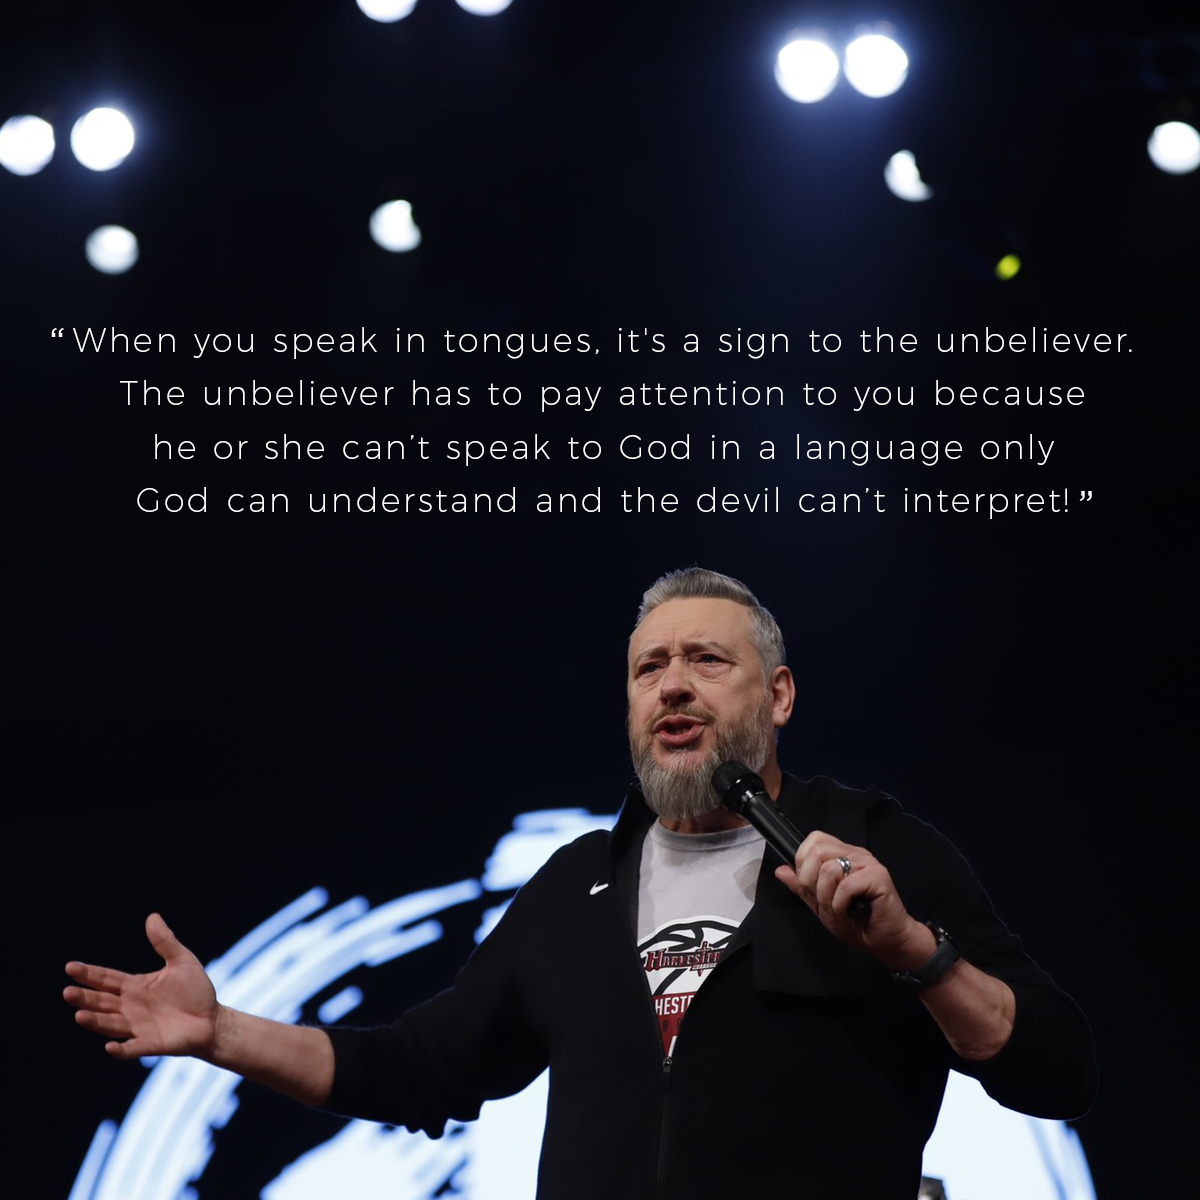 “When you speak in tongues, it's a sign to the unbeliever. The unbeliever has to pay attention to you because he or she can’t speak to God in a language only God can understand and the devil can’t interpret!” – Pastor Rod Parsley